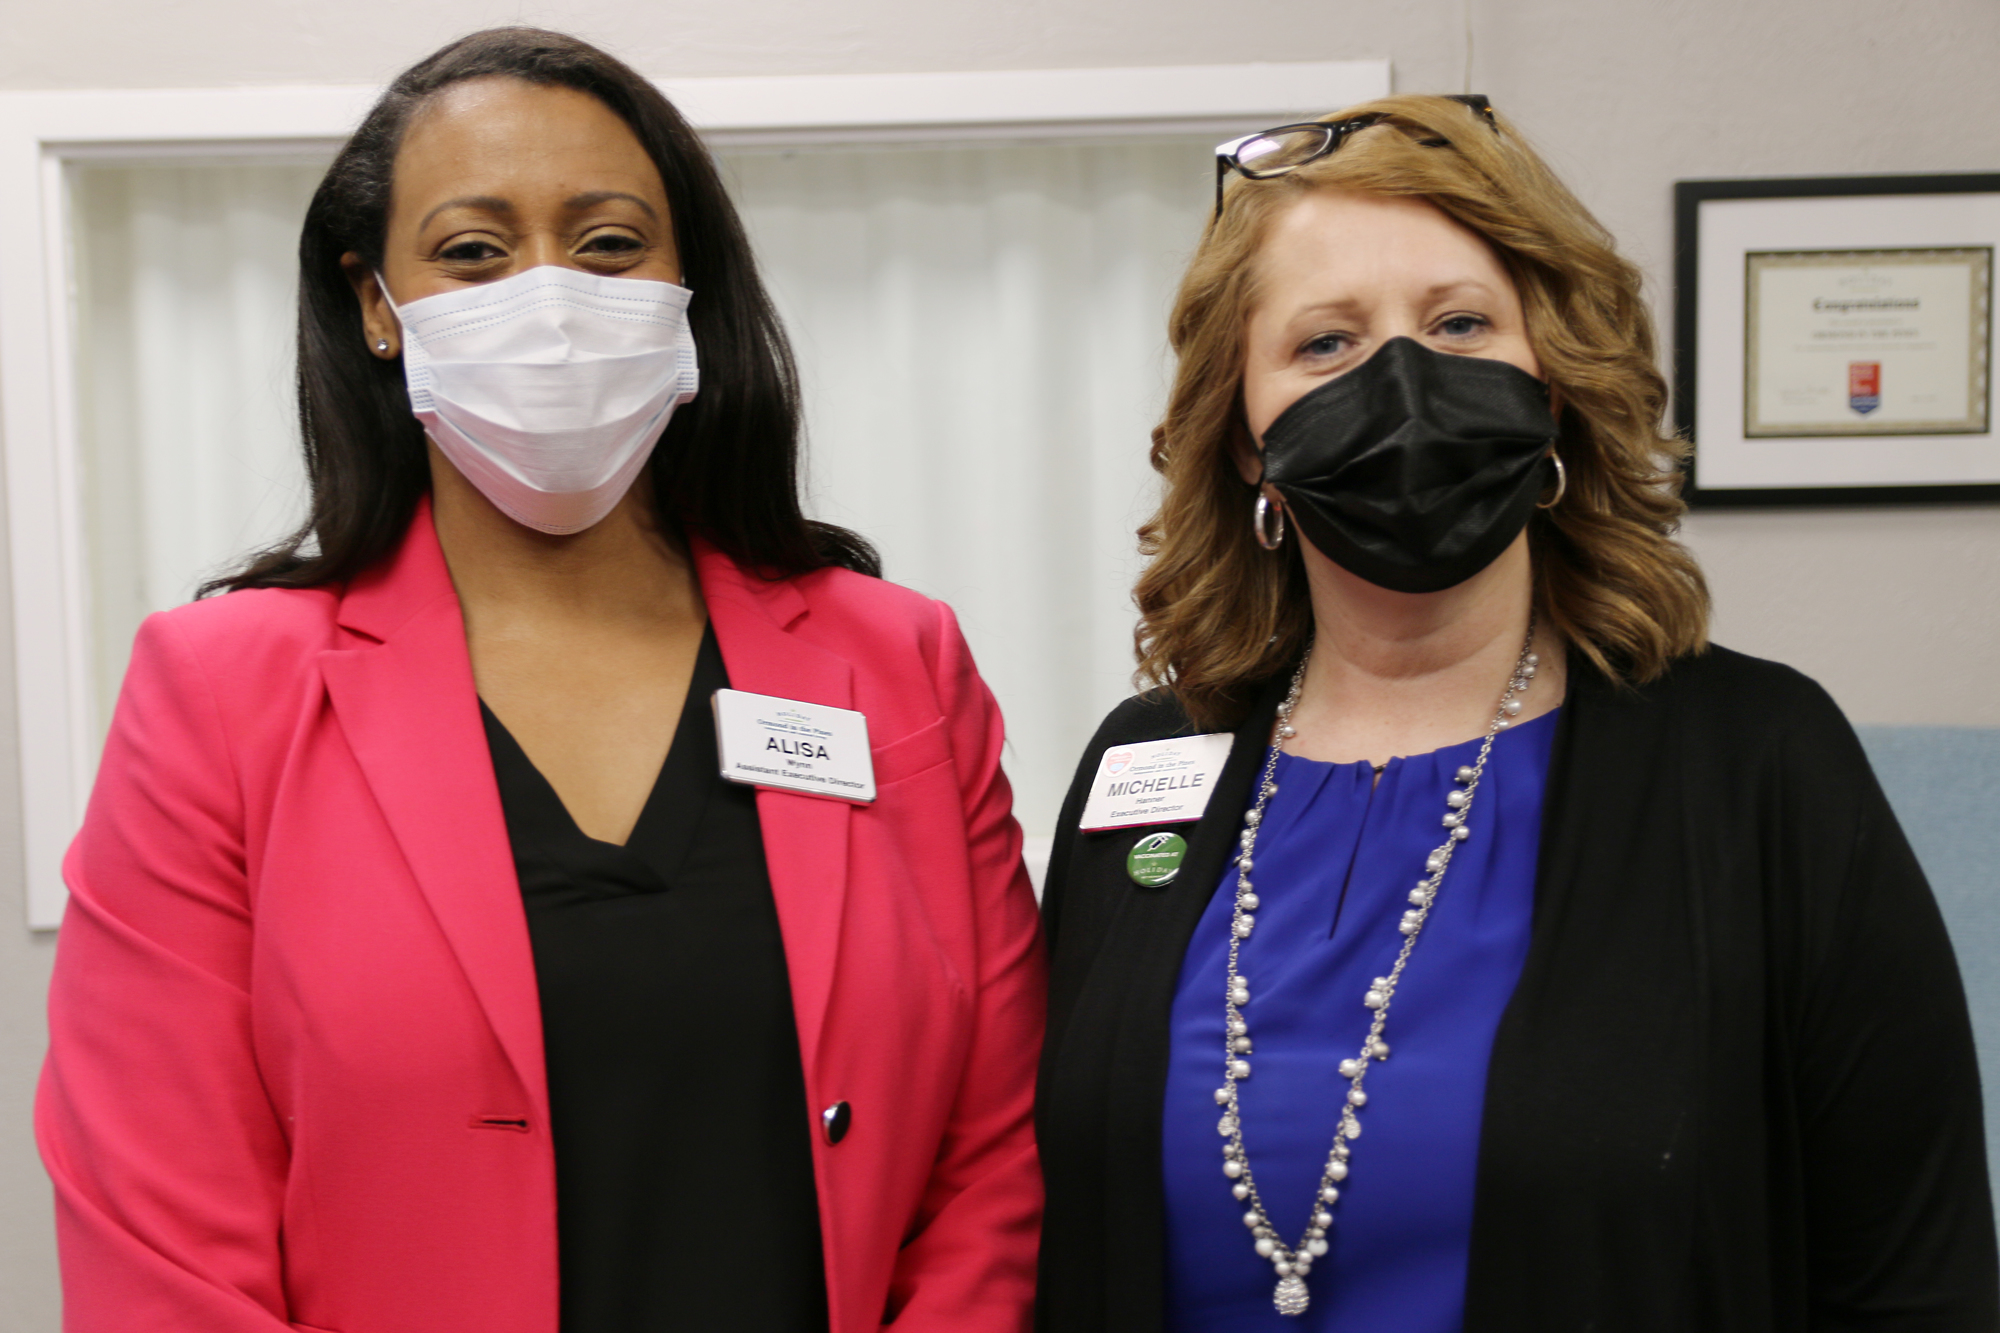 Alisa Wynn, assistant executive director, and Michelle Hanner, executive director, expressed the importance of getting vaccinated to protect others. Photo by Jarleene Almena